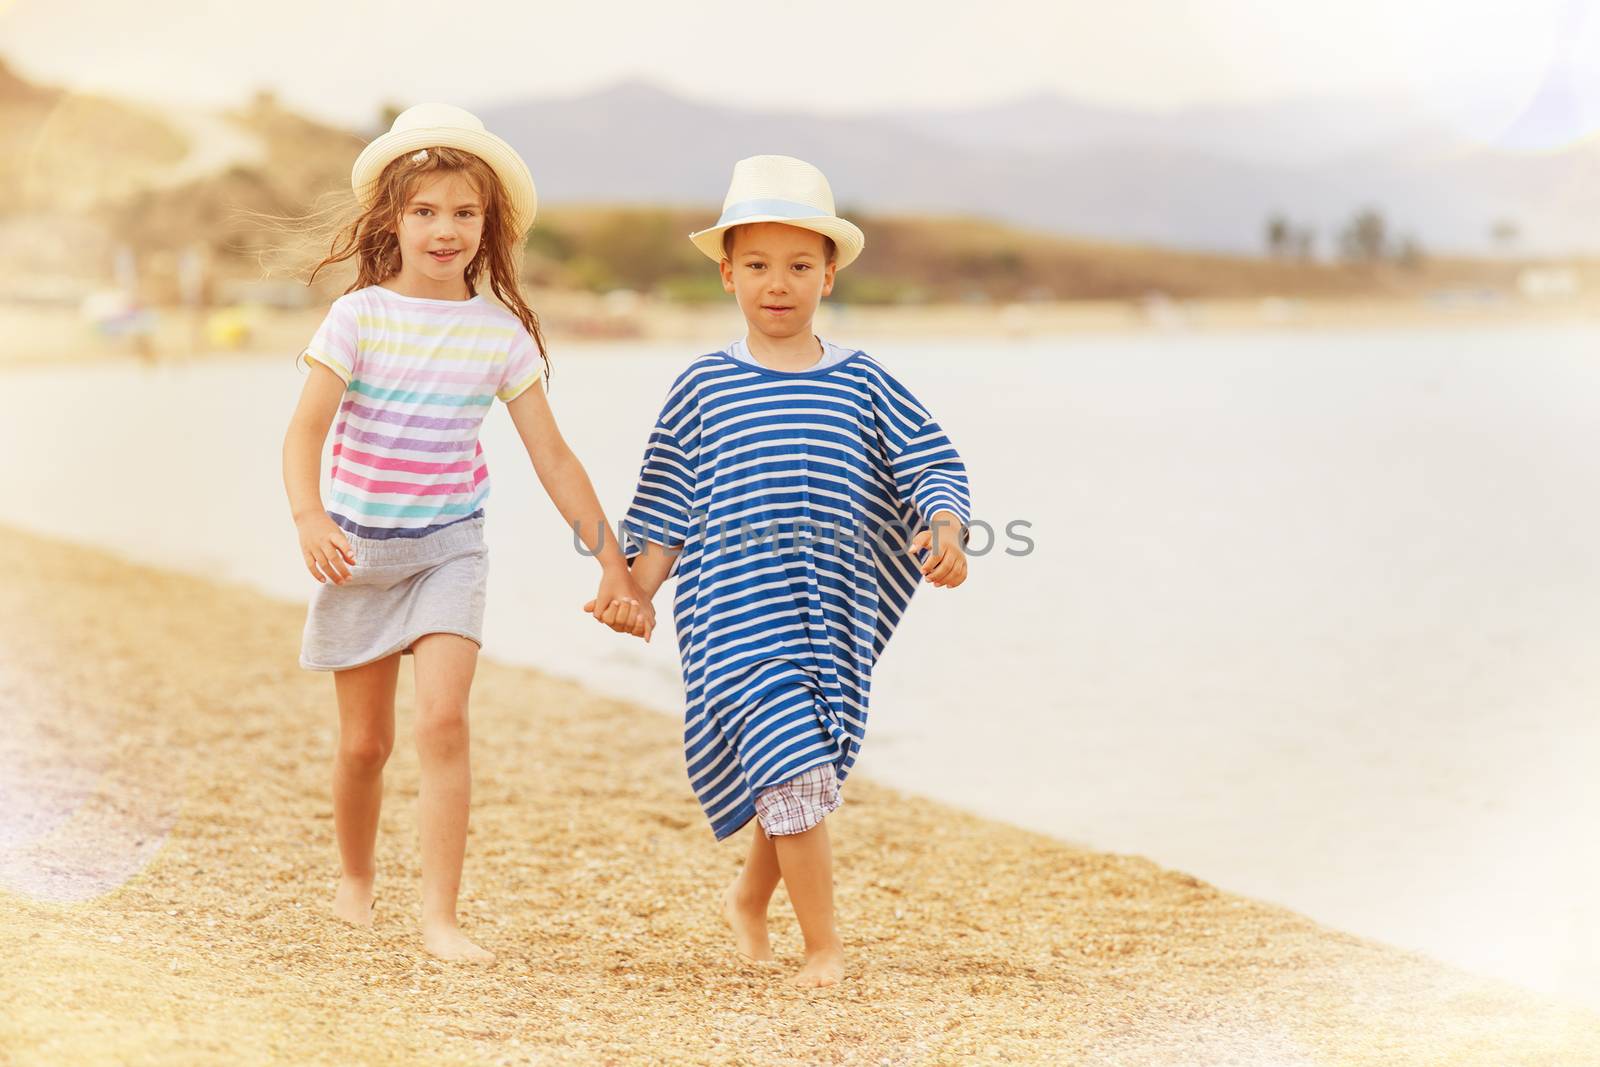 A boy and a girl around six holding hands while taking a walk on the beach smiling.